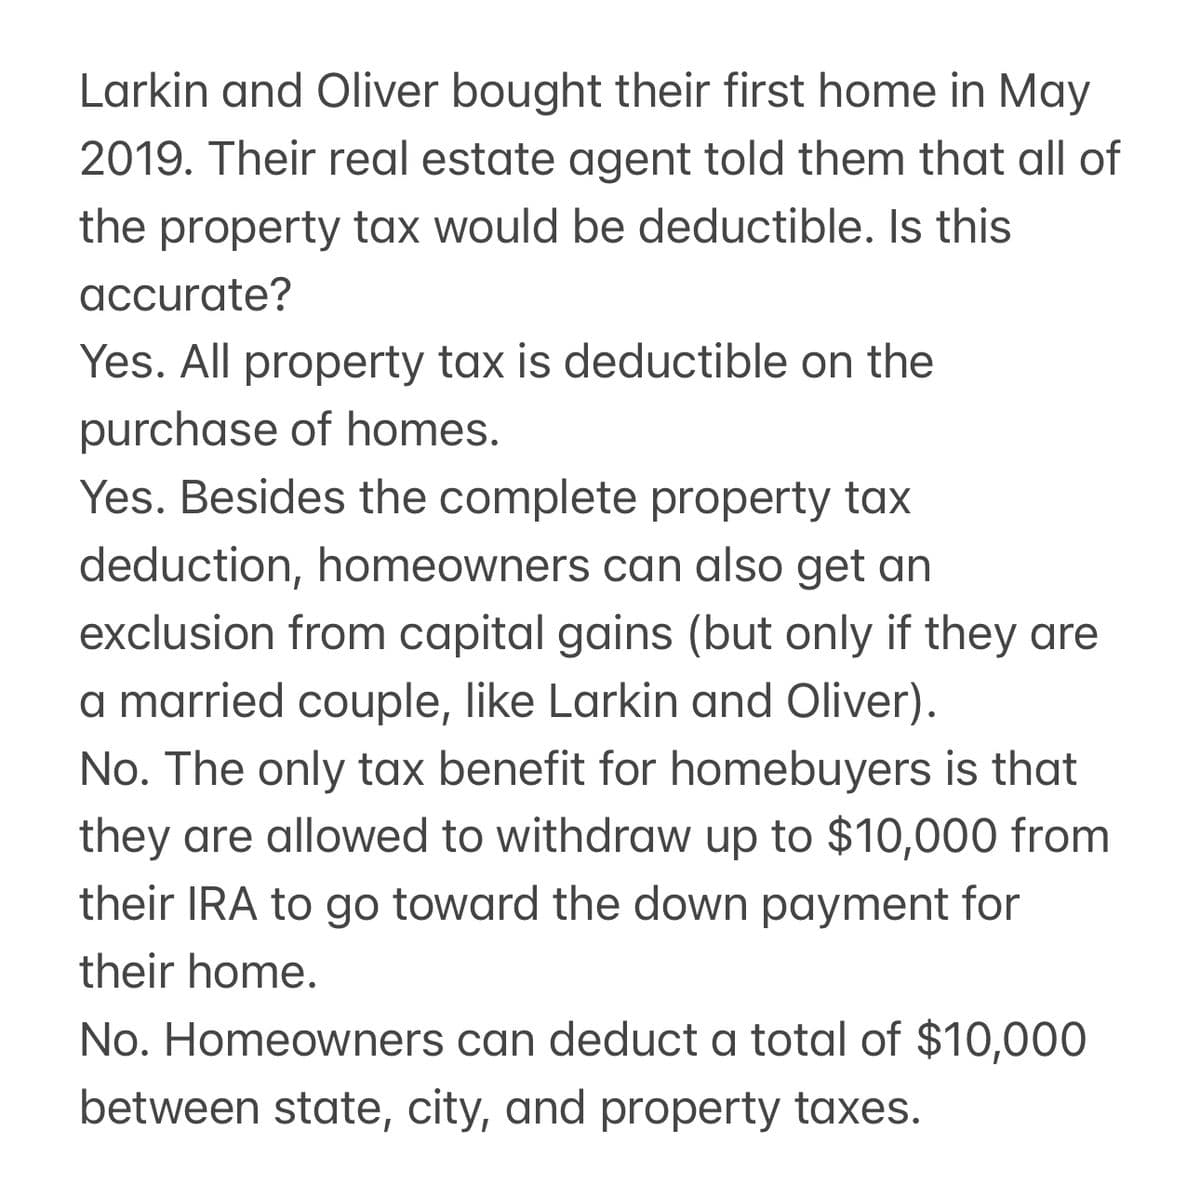 Larkin and Oliver bought their first home in May
2019. Their real estate agent told them that all of
the property tax would be deductible. Is this
accurate?
Yes. All property tax is deductible on the
purchase of homes.
Yes. Besides the complete property tax
deduction, homeowners can also get an
exclusion from capital gains (but only if they are
a married couple, like Larkin and Oliver).
No. The only tax benefit for homebuyers is that
they are allowed to withdraw up to $10,000 from
their IRA to go toward the down payment for
their home.
No. Homeowners can deduct a total of $10,000
between state, city, and property taxes.